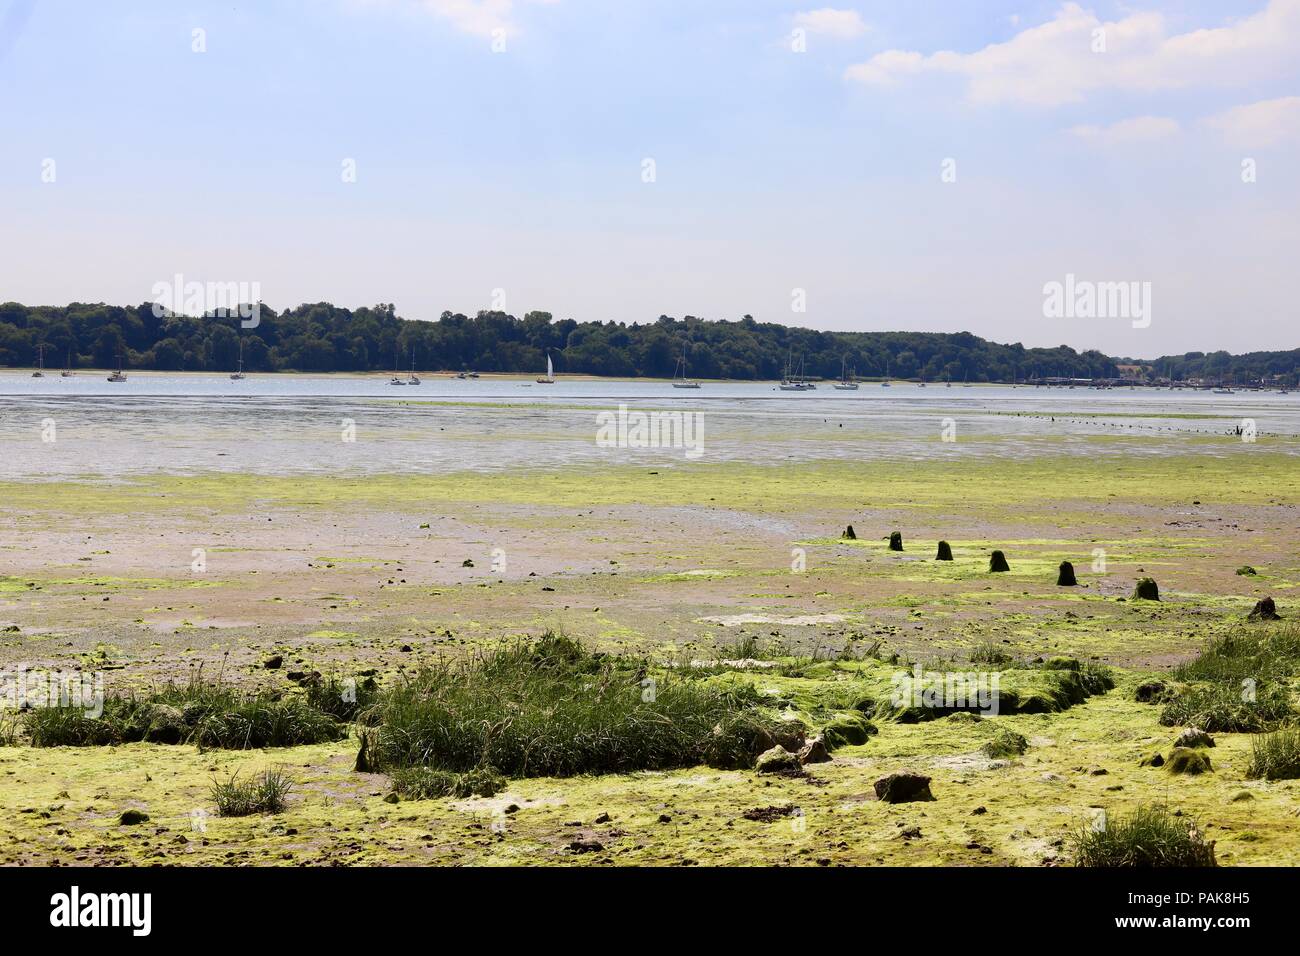 Suffolk, UK. 23rd July 2018. UK Weather: Blisteringly hot afternoon walk along Nacton shores. Ipswich, Suffolk. Credit: Angela Chalmers/Alamy Live News Stock Photo